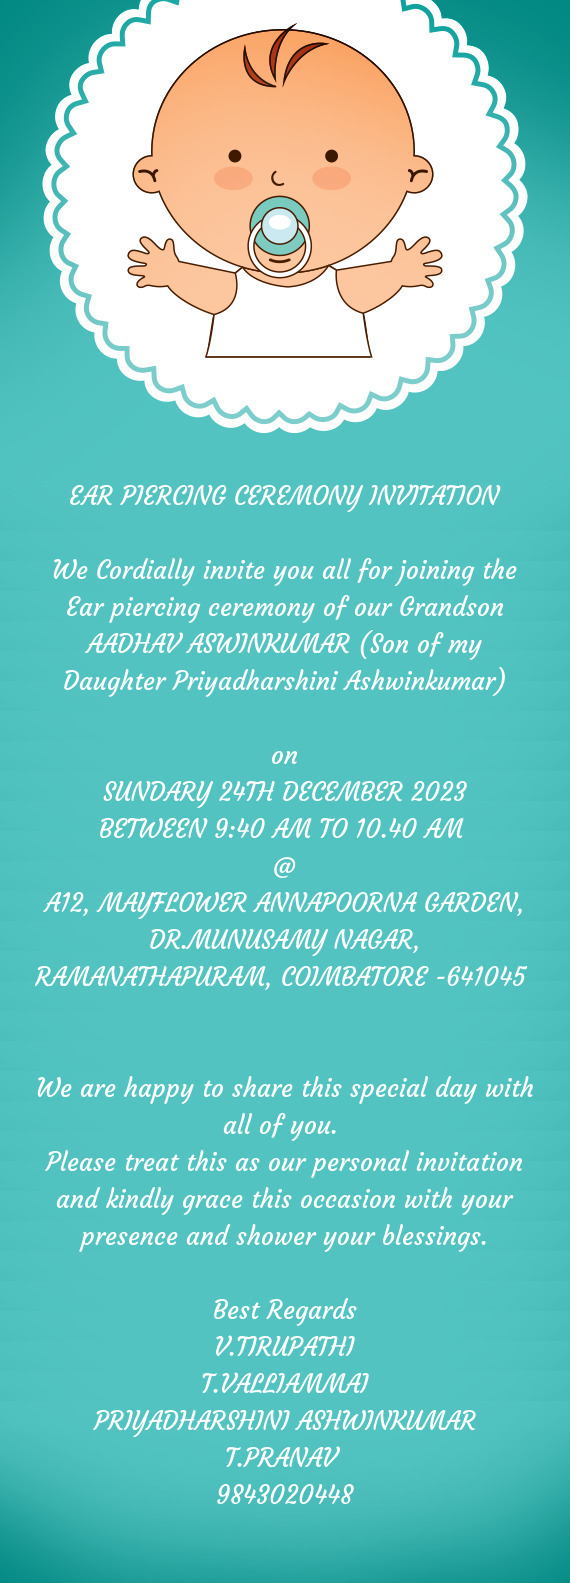 We Cordially invite you all for joining the Ear piercing ceremony of our Grandson AADHAV ASWINKUMAR